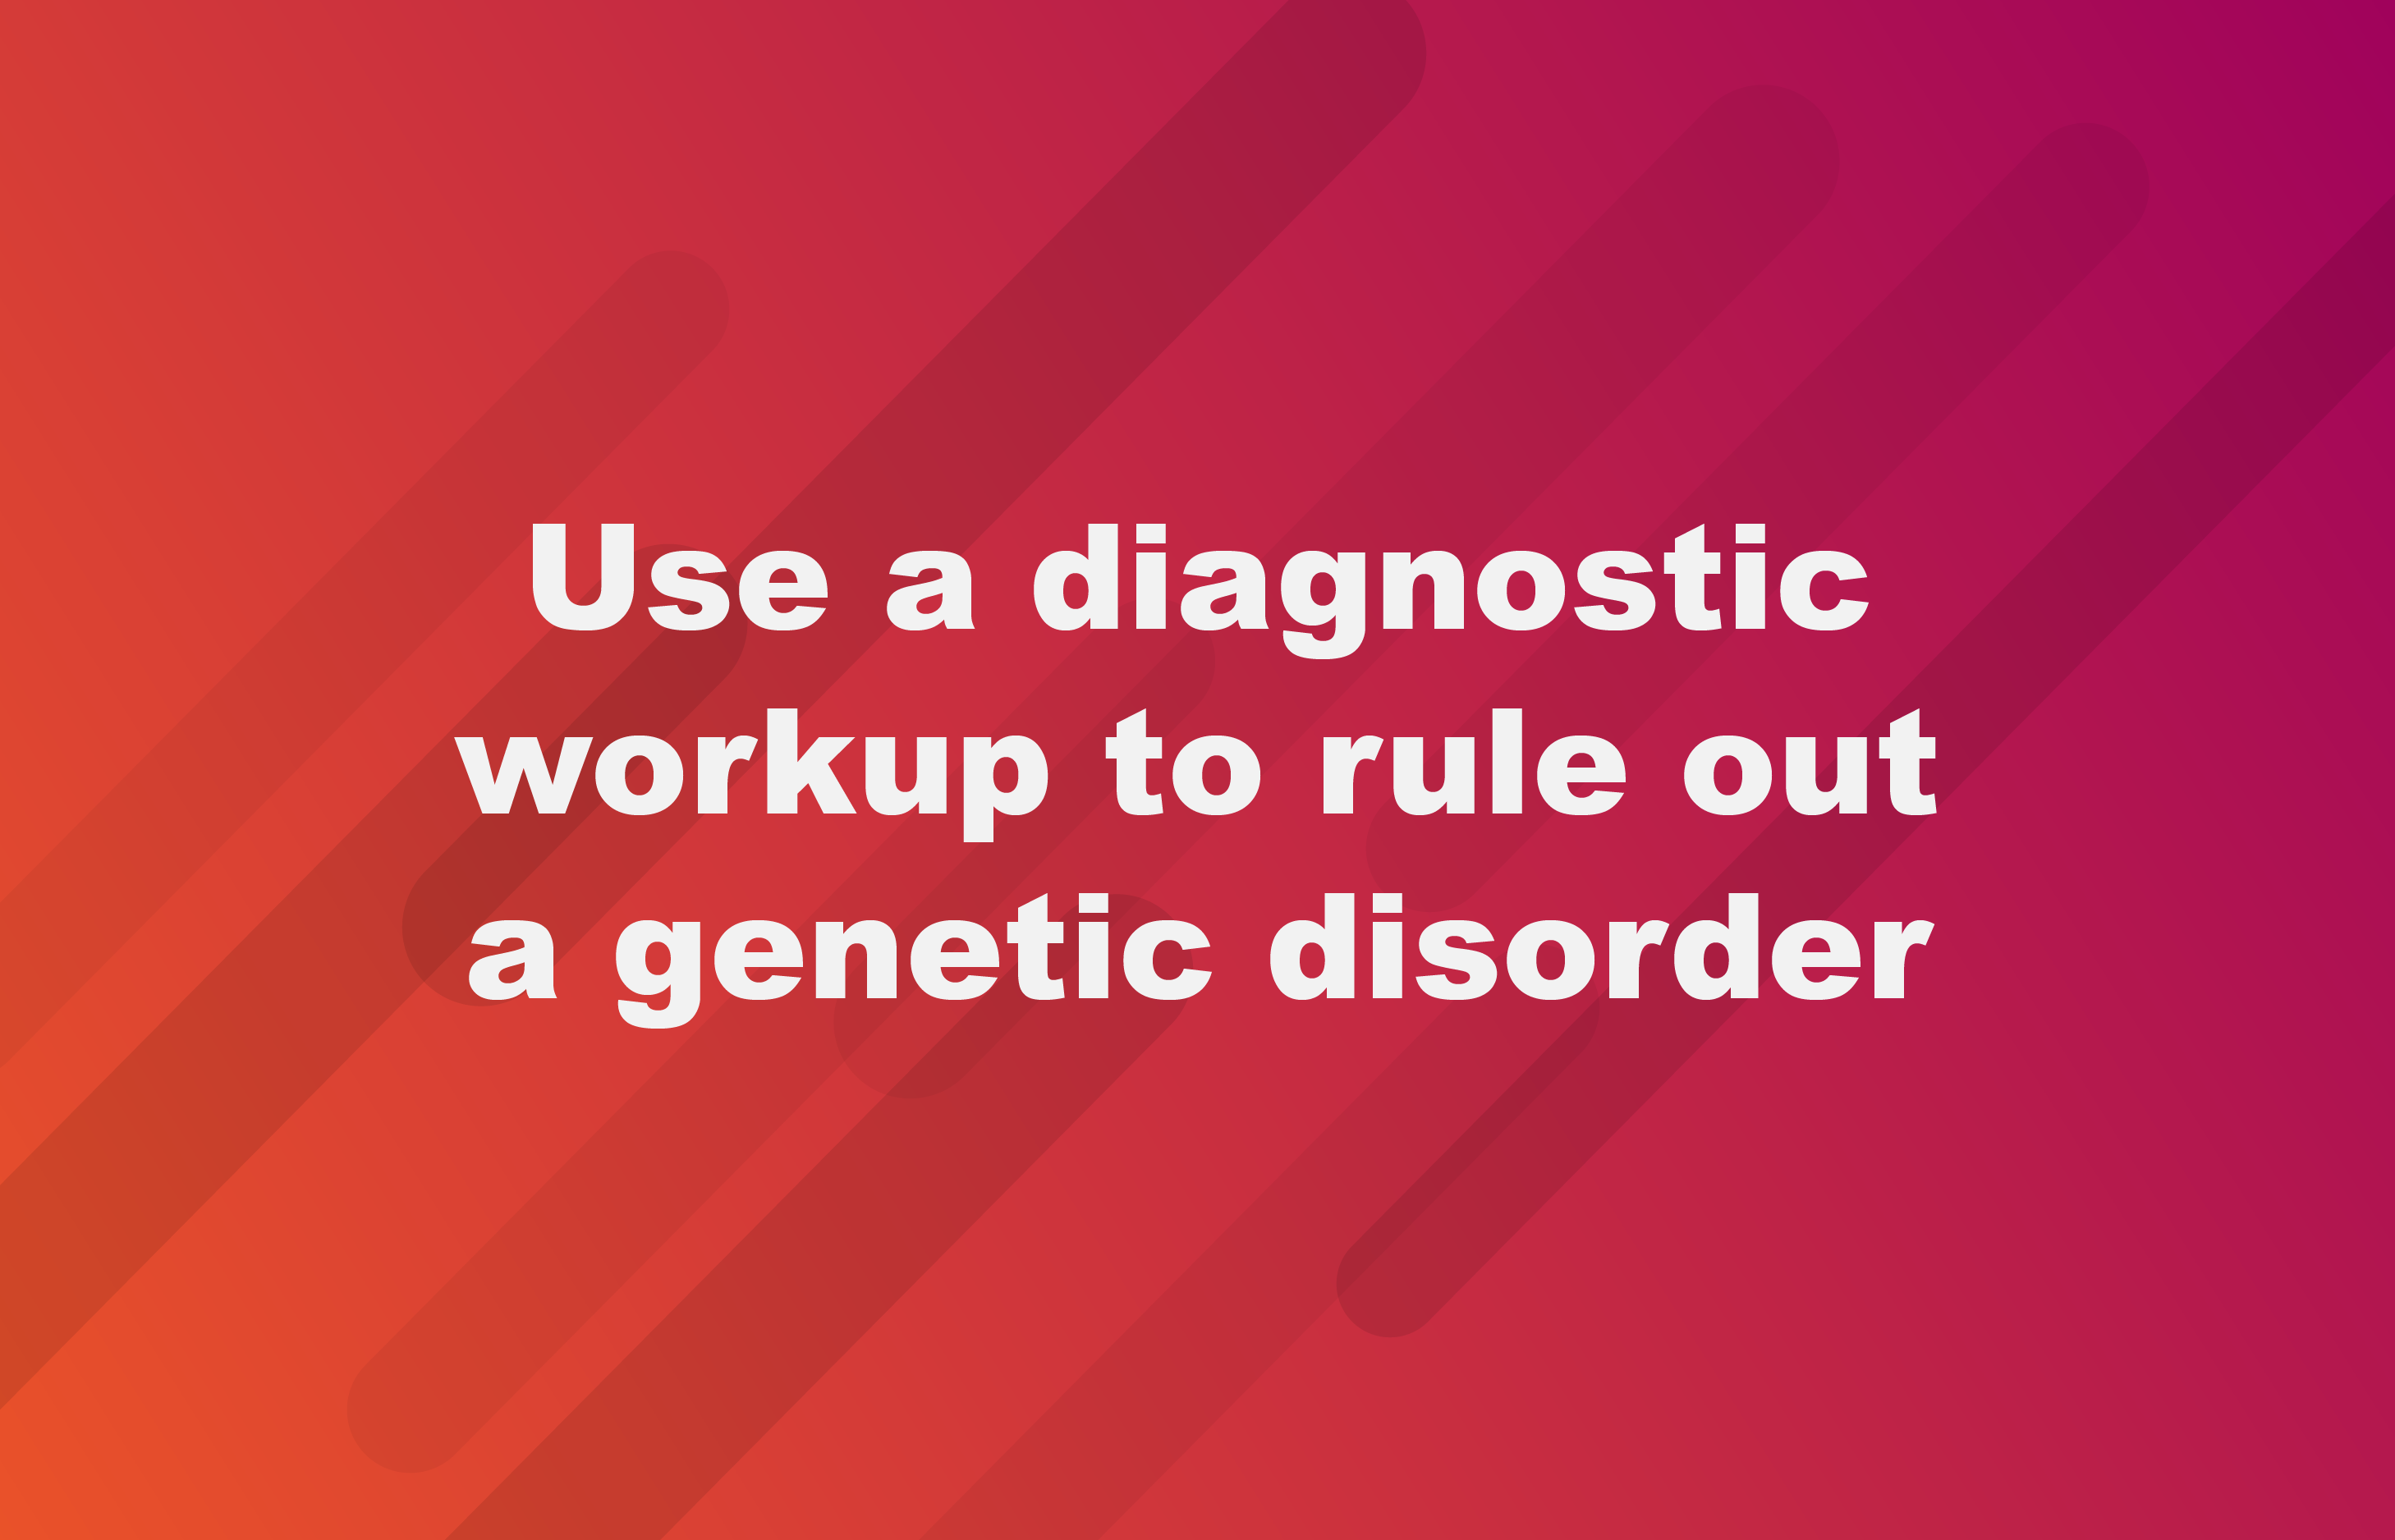 Use a diagnostic workup to rule out a genetic disorder